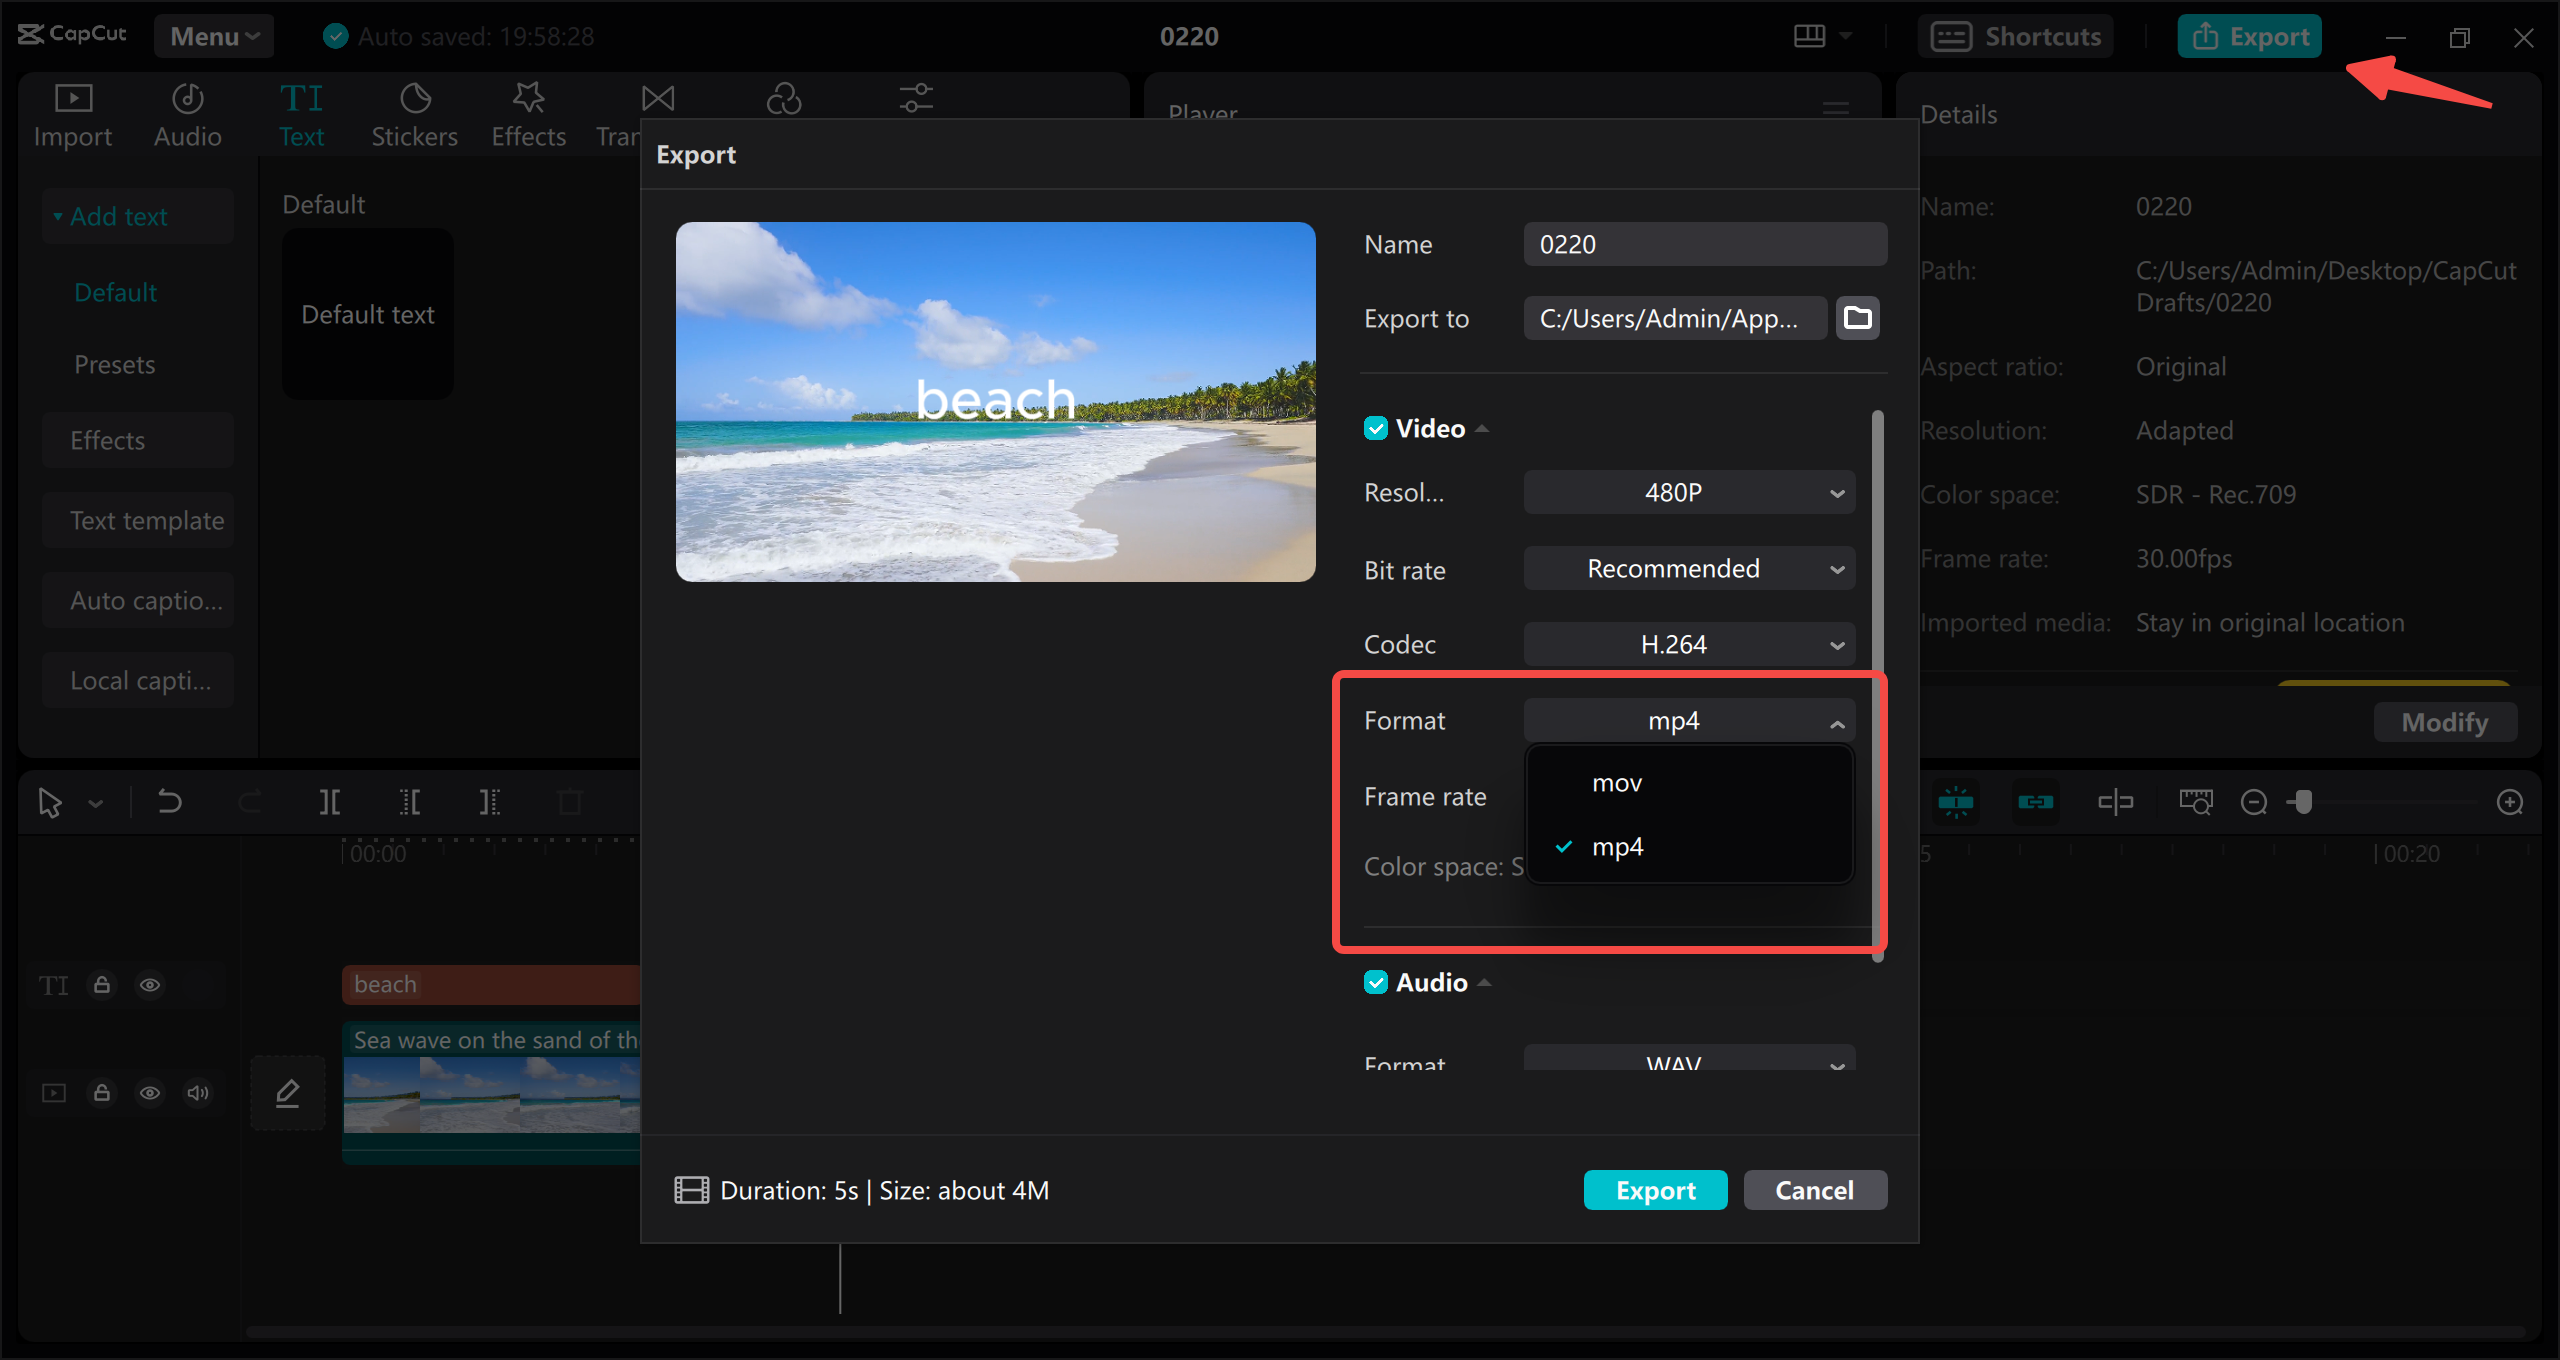 Convert and export MP4 video